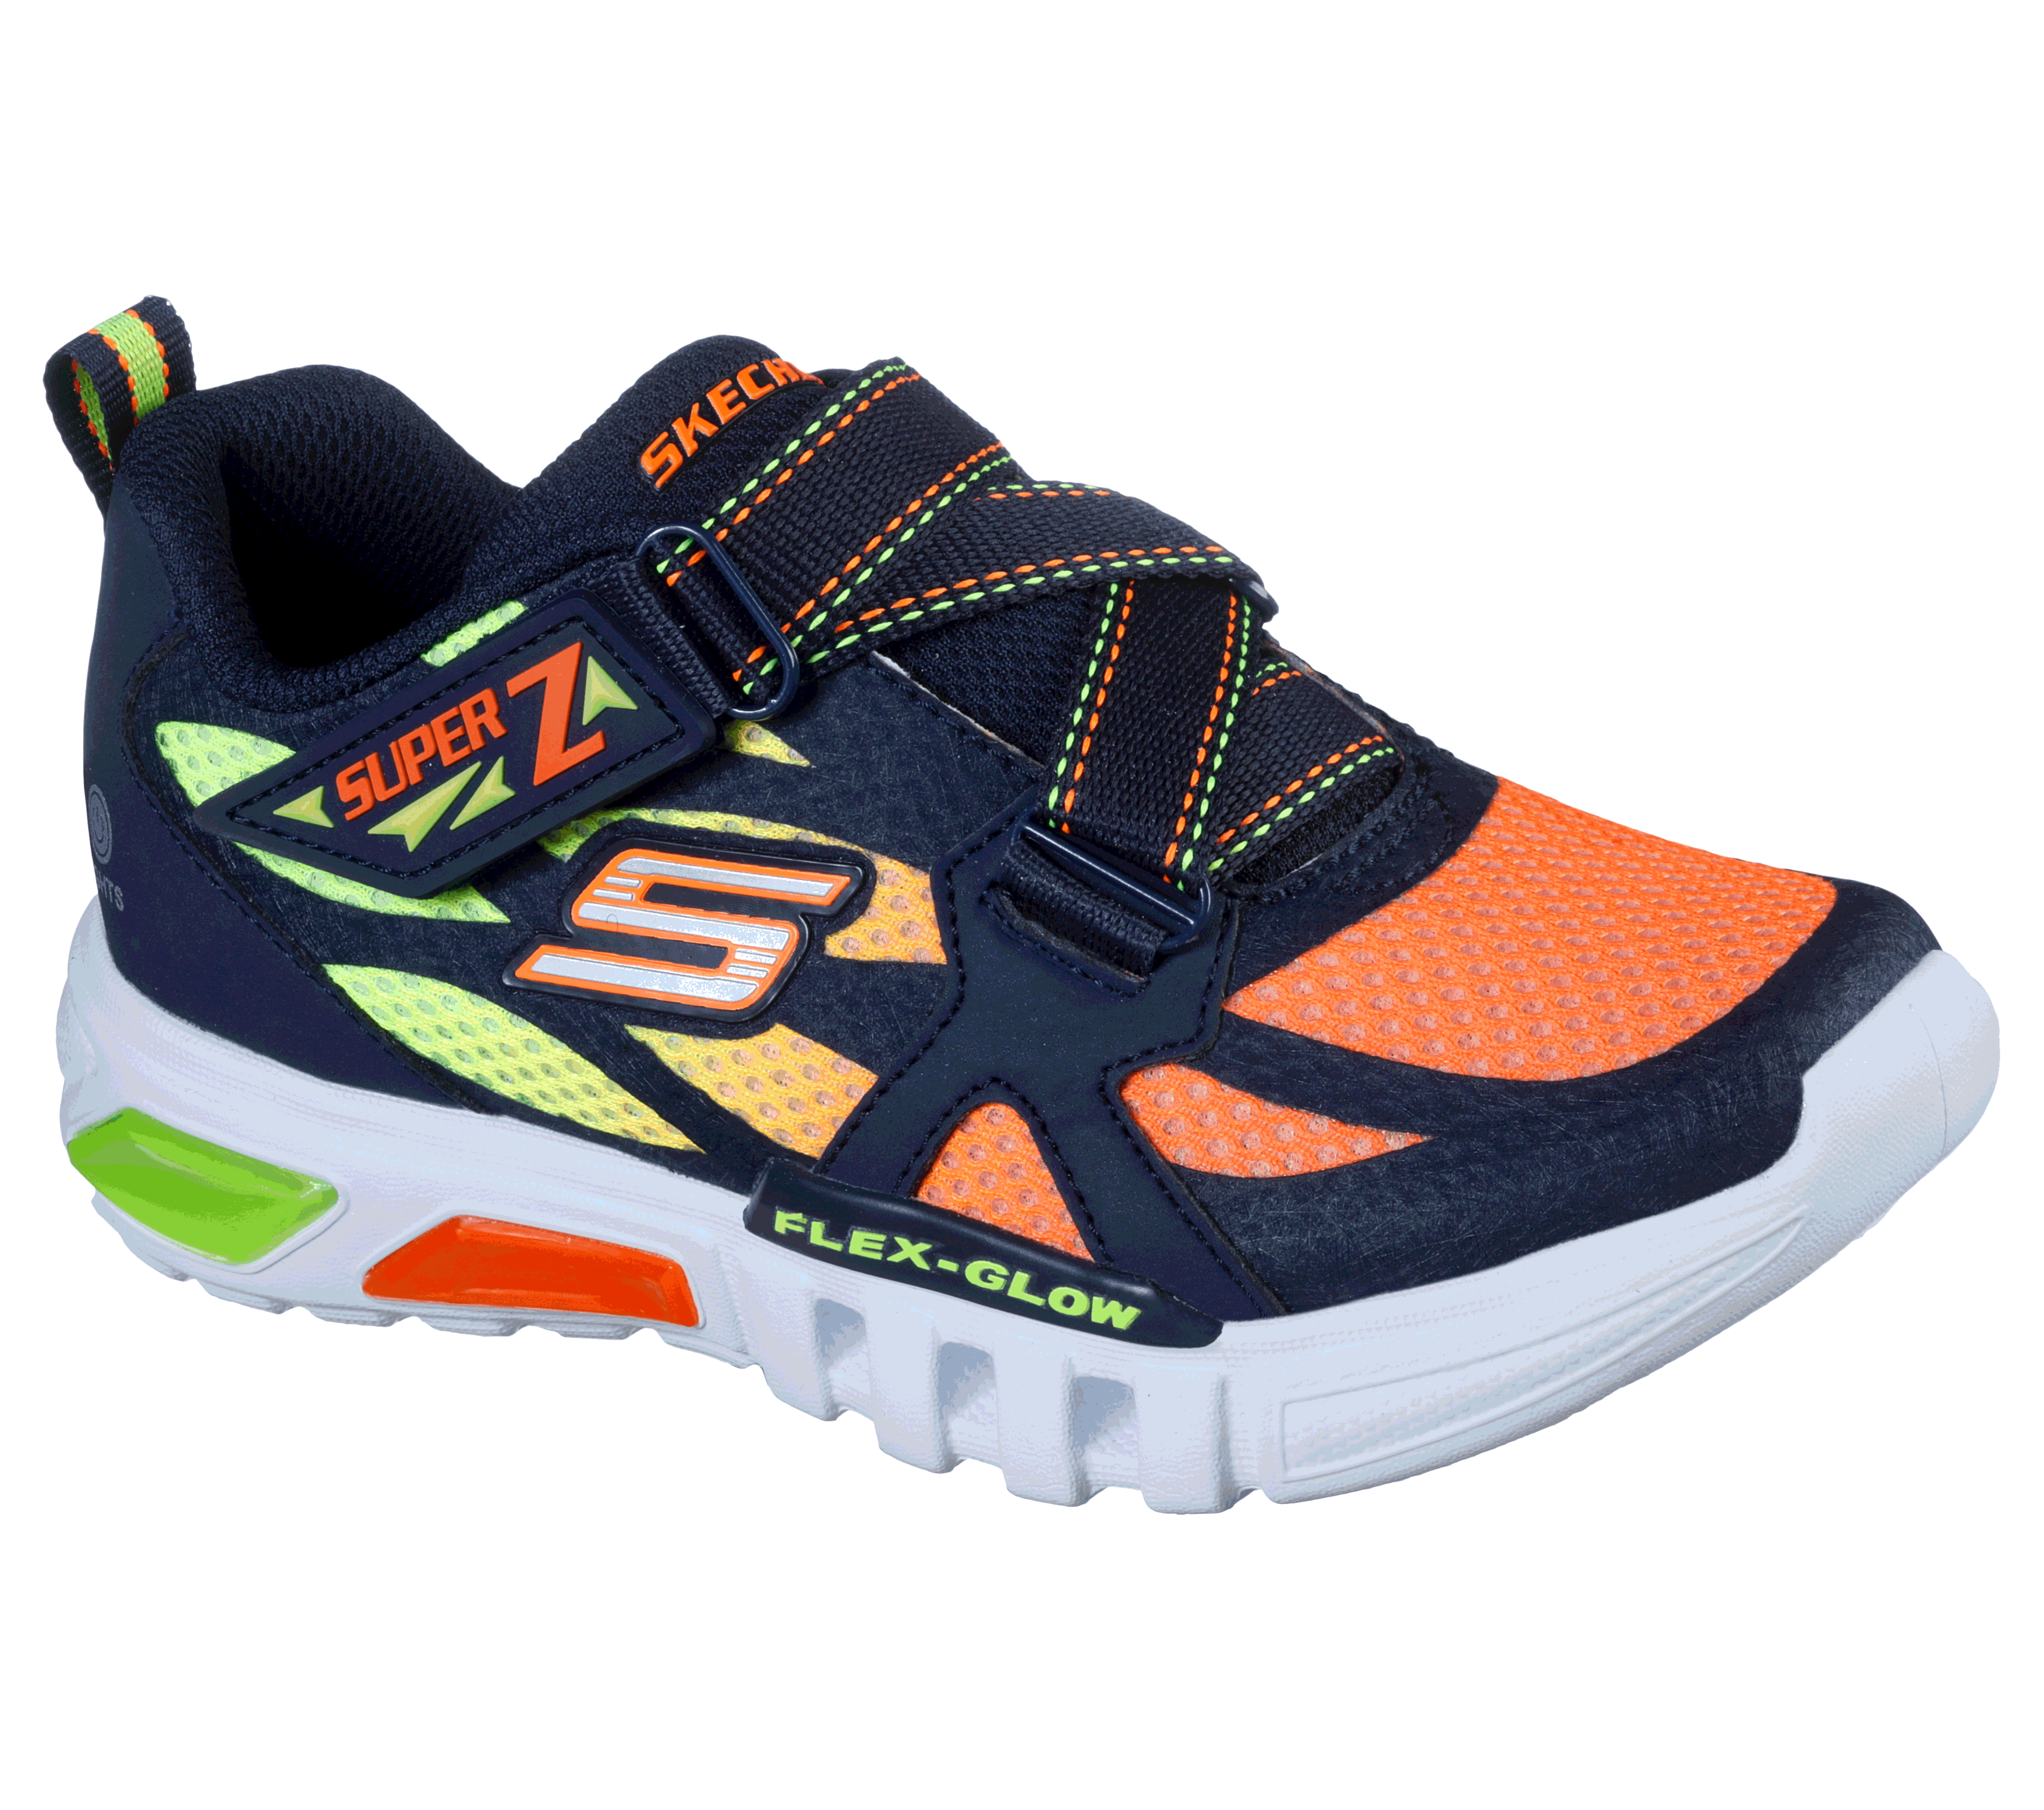 skechers push up shoes